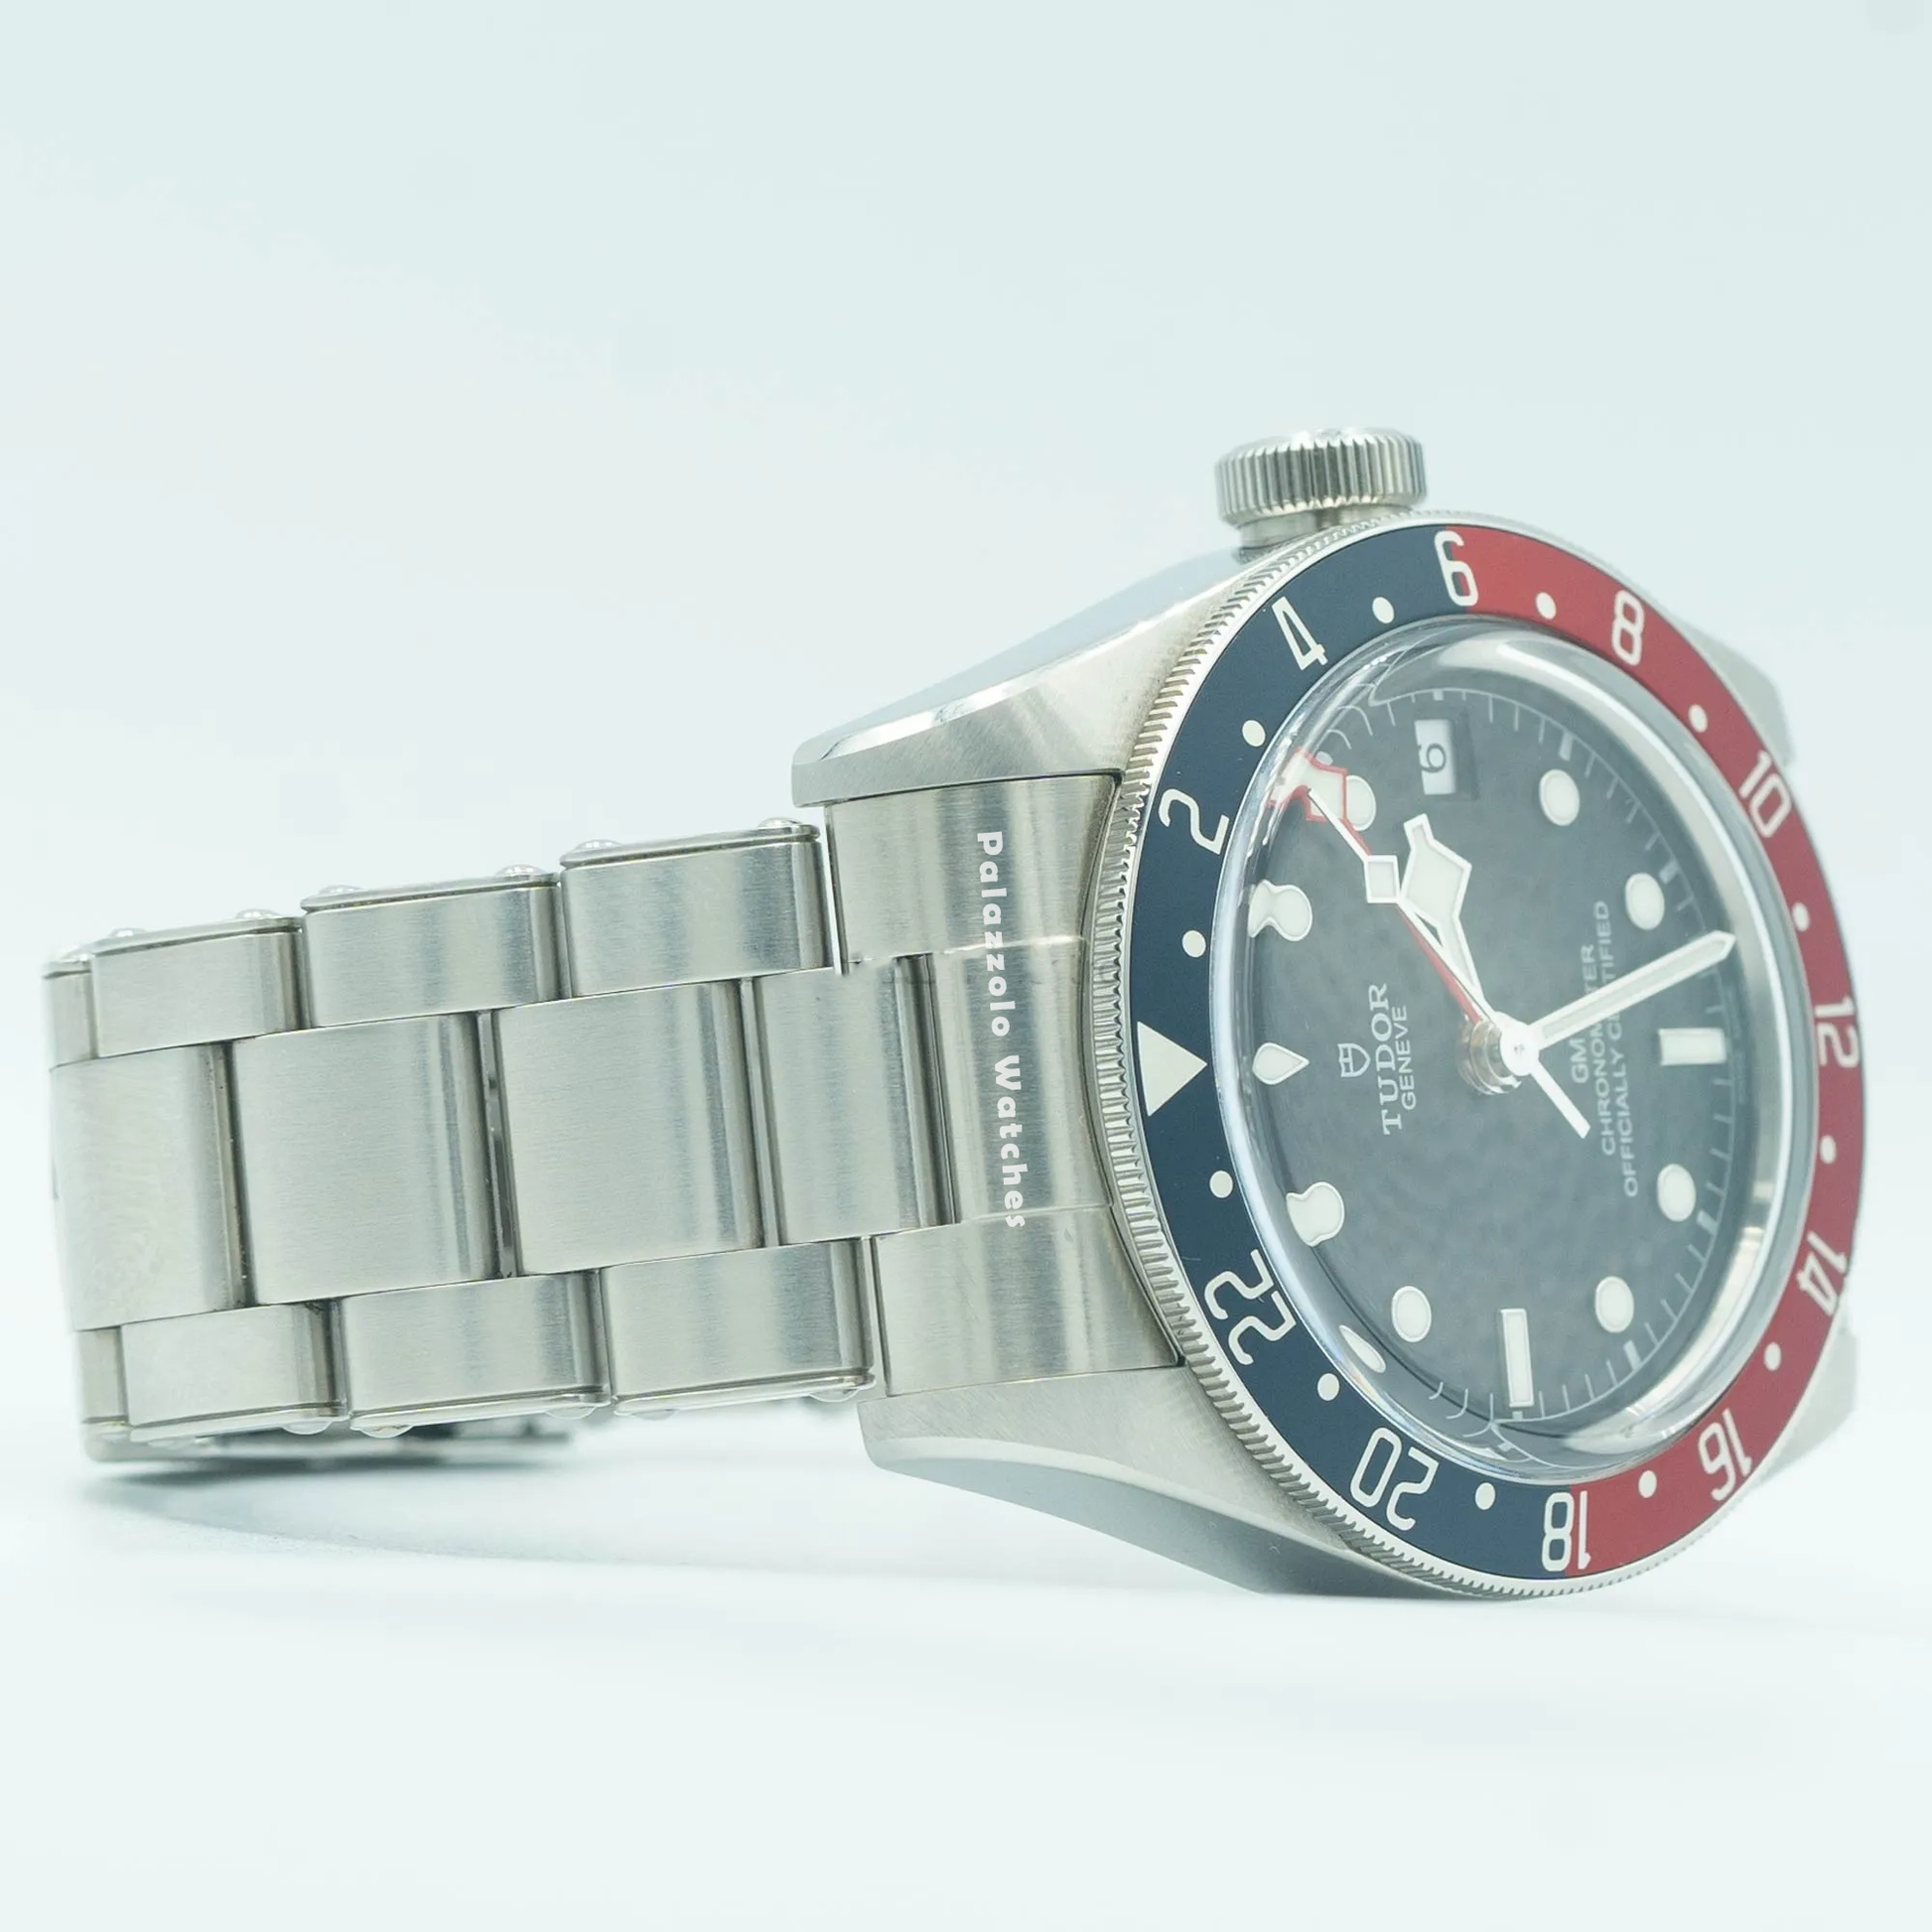 Tudor Black Bay GMT 41mm with Red and Blue Bezel - Palazzolo Watches